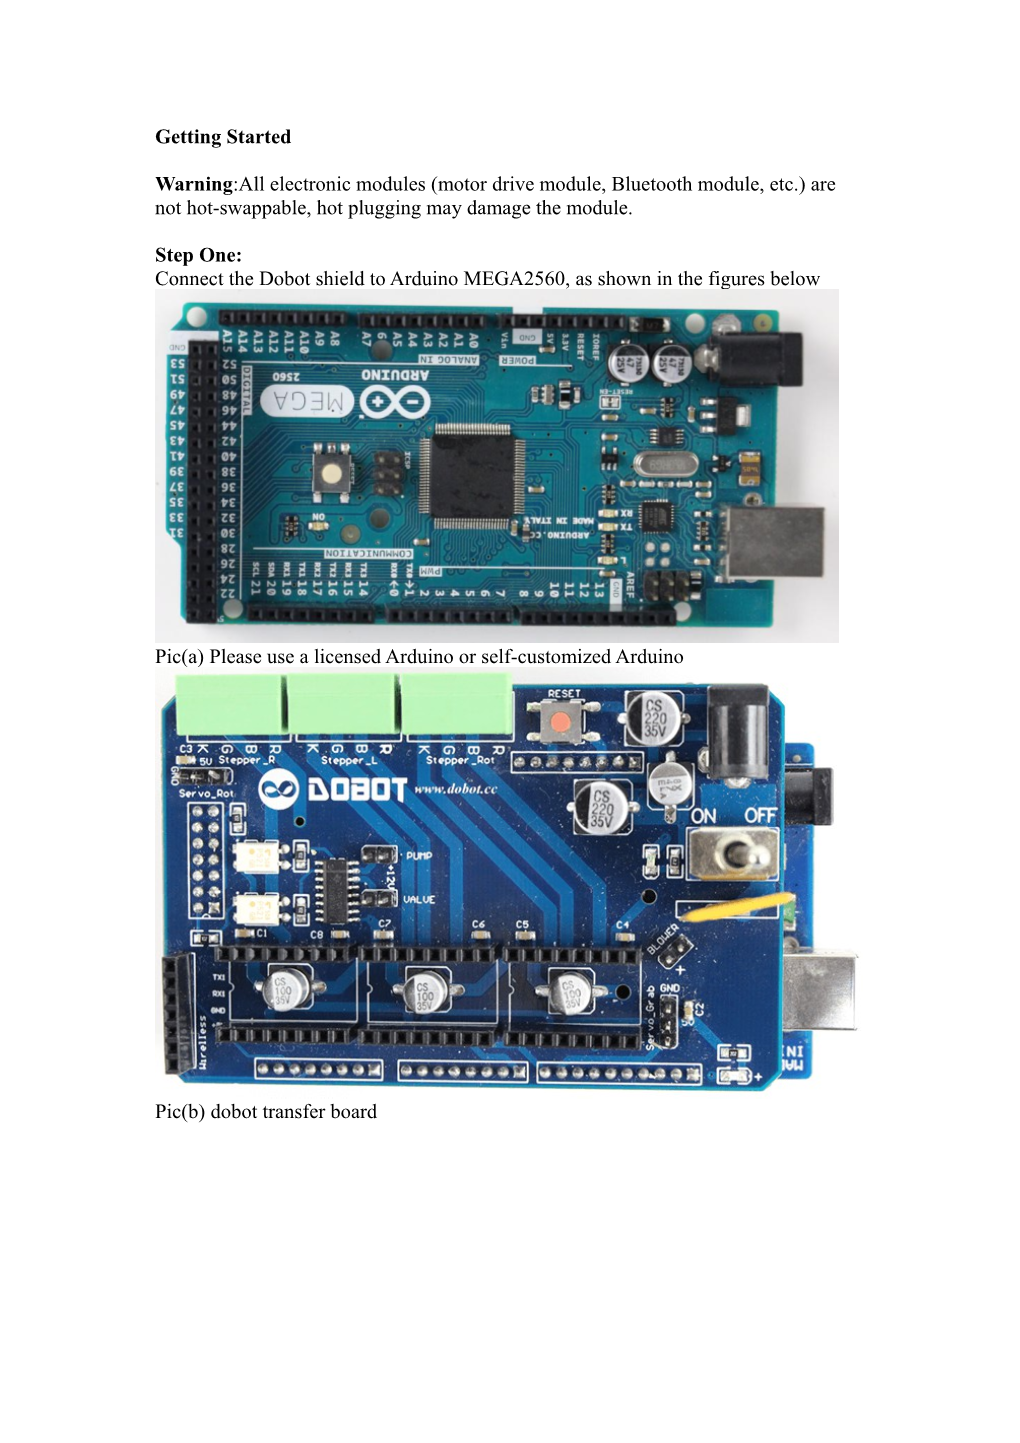 Connect the Dobot Shield to Arduino MEGA2560, As Shown in the Figures Below